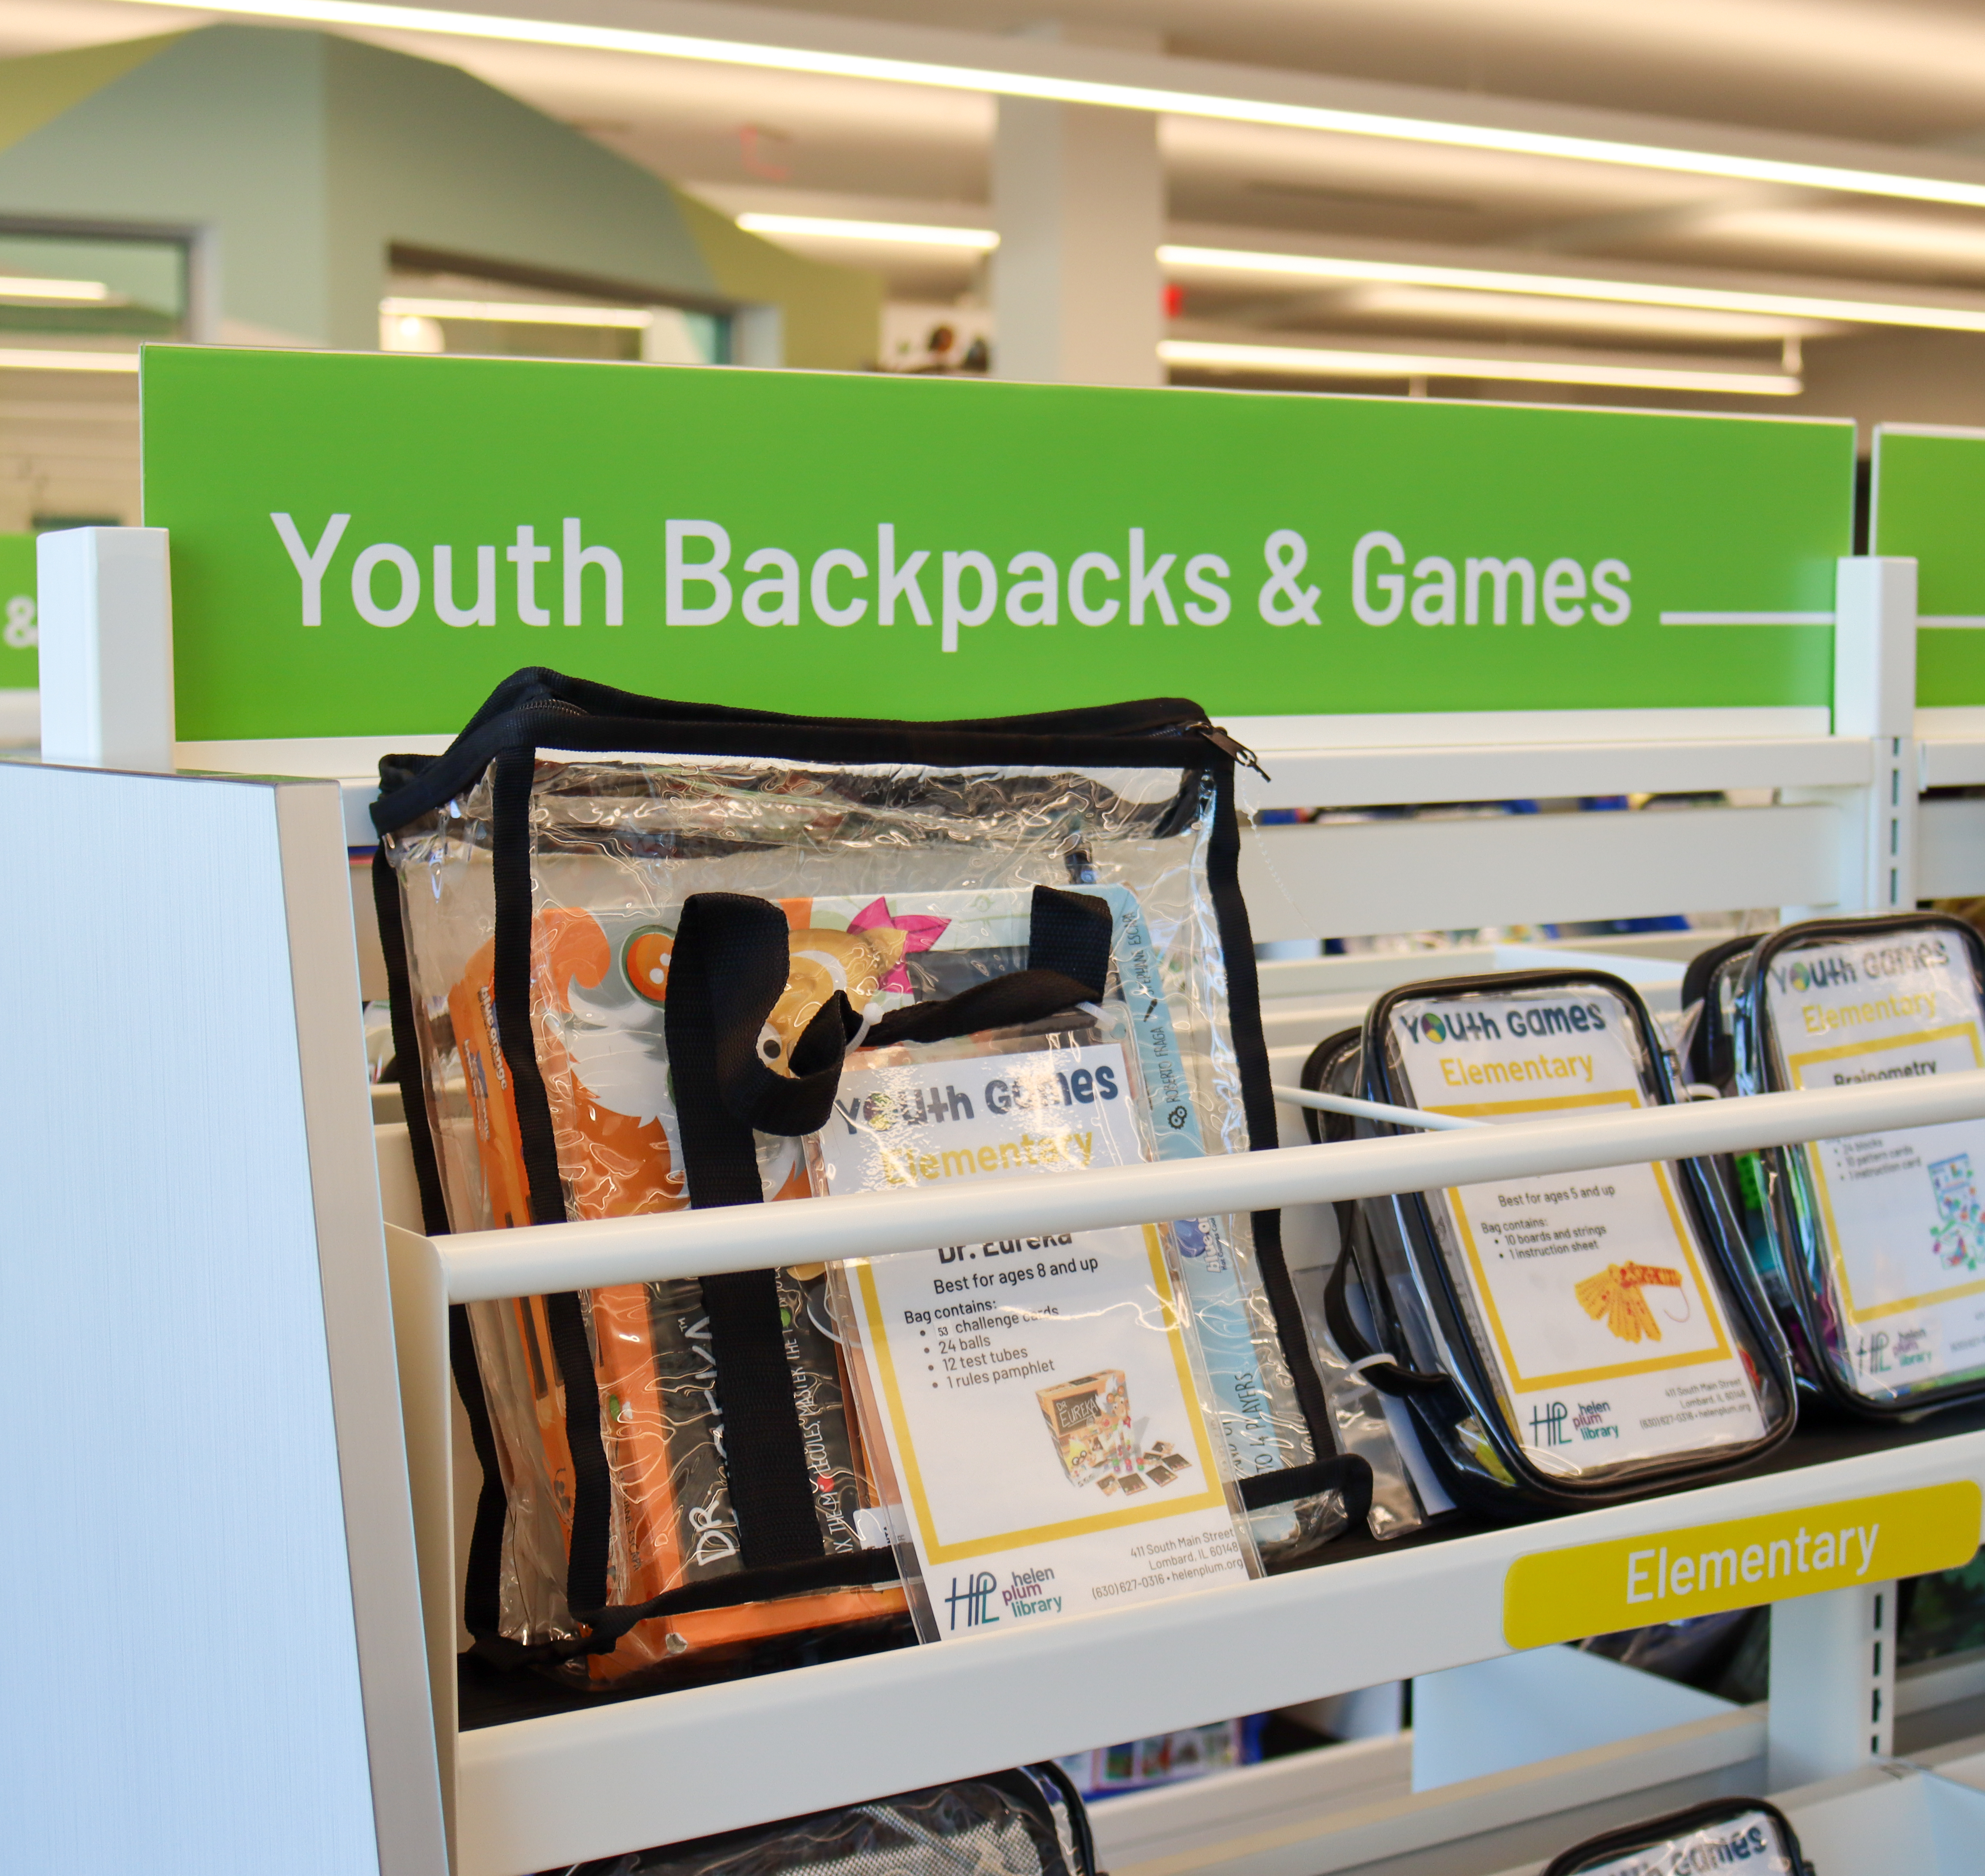 Shelf in Youth Services with a green sign that says Youth Backpacks & Games. Under the sign are 3 backpacks with various youth games inside.